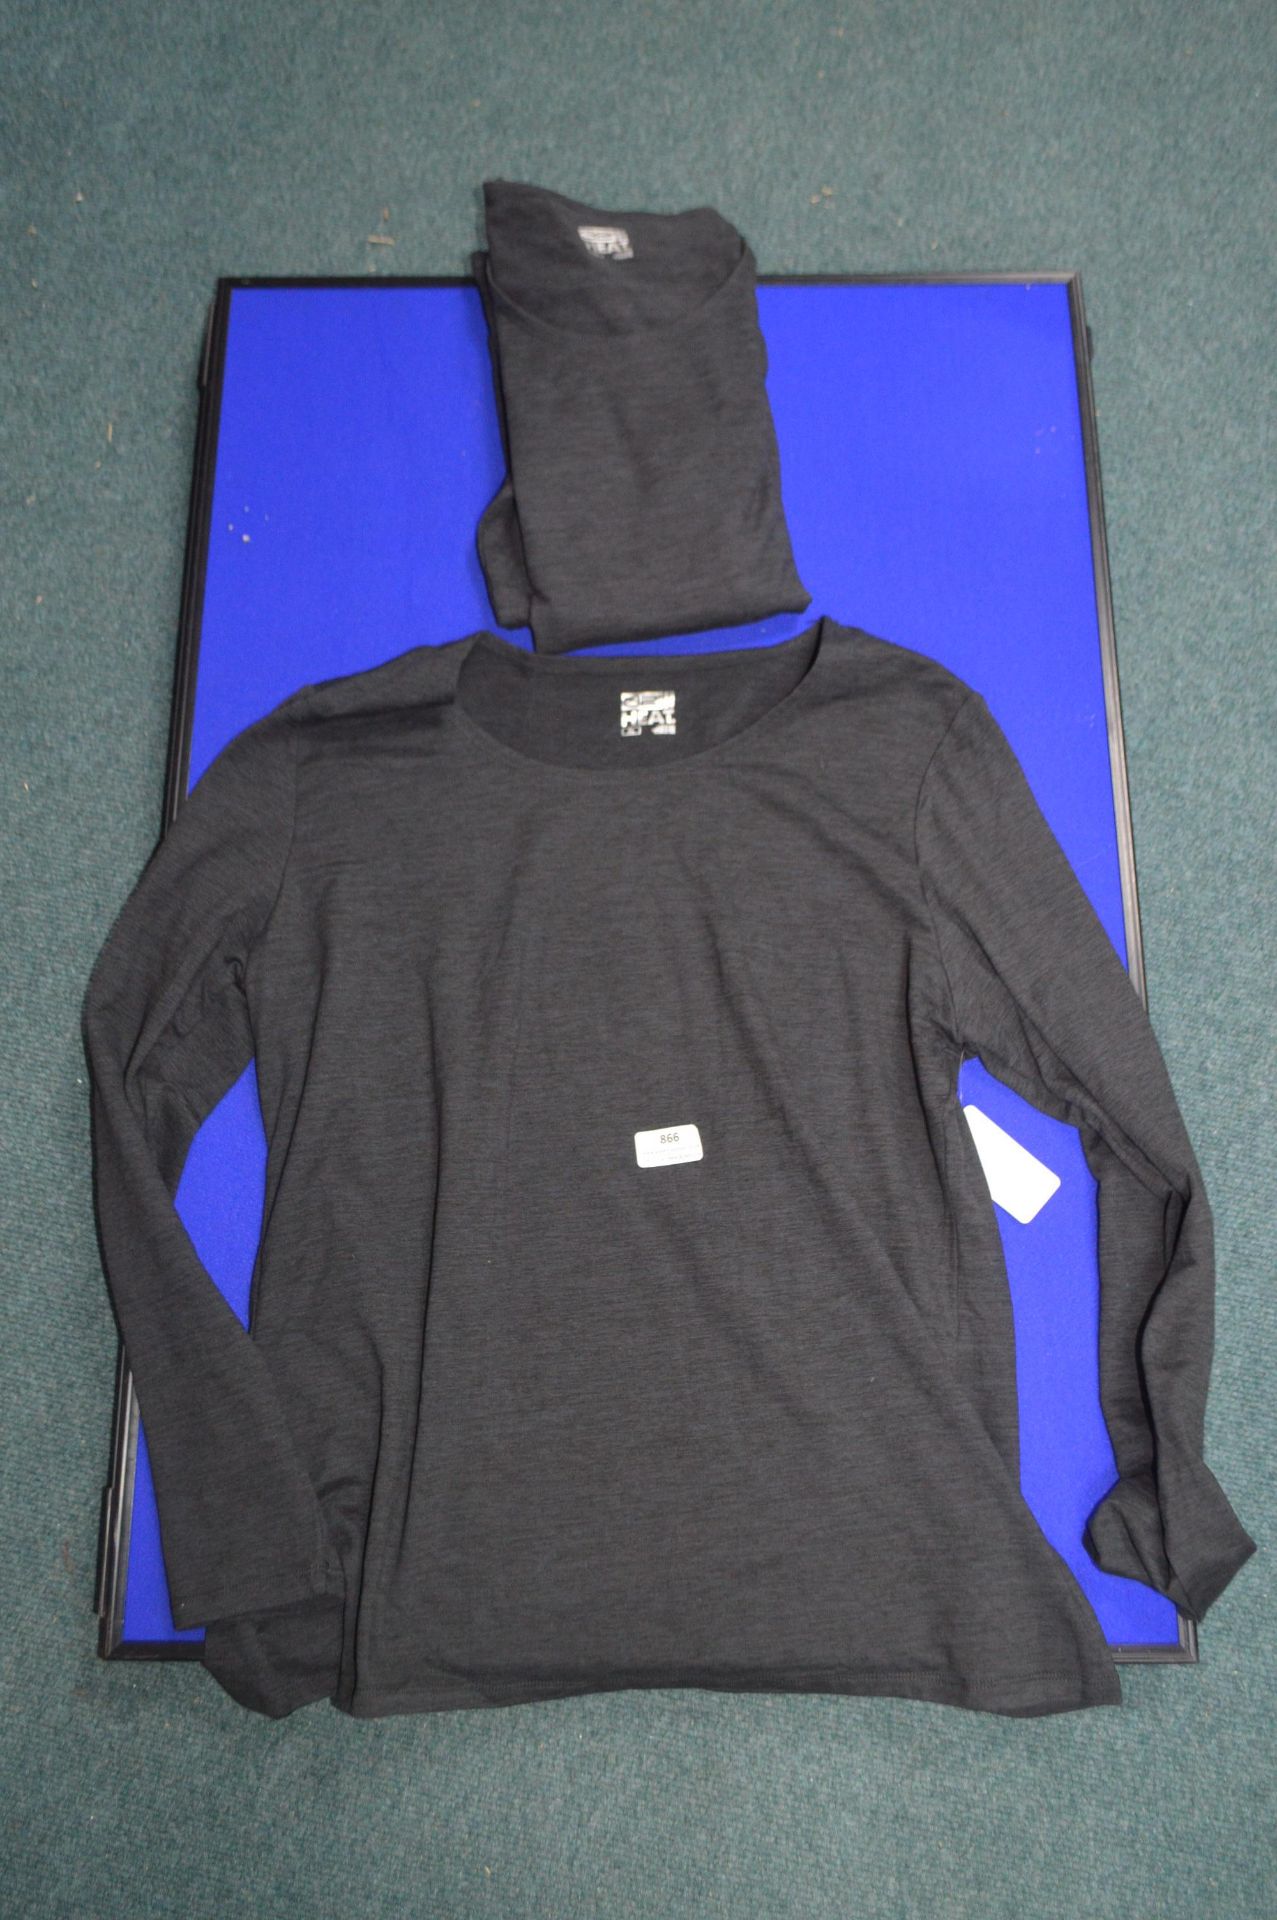 *32 Degrees Heat Thermal Tops 2pk Size: XL